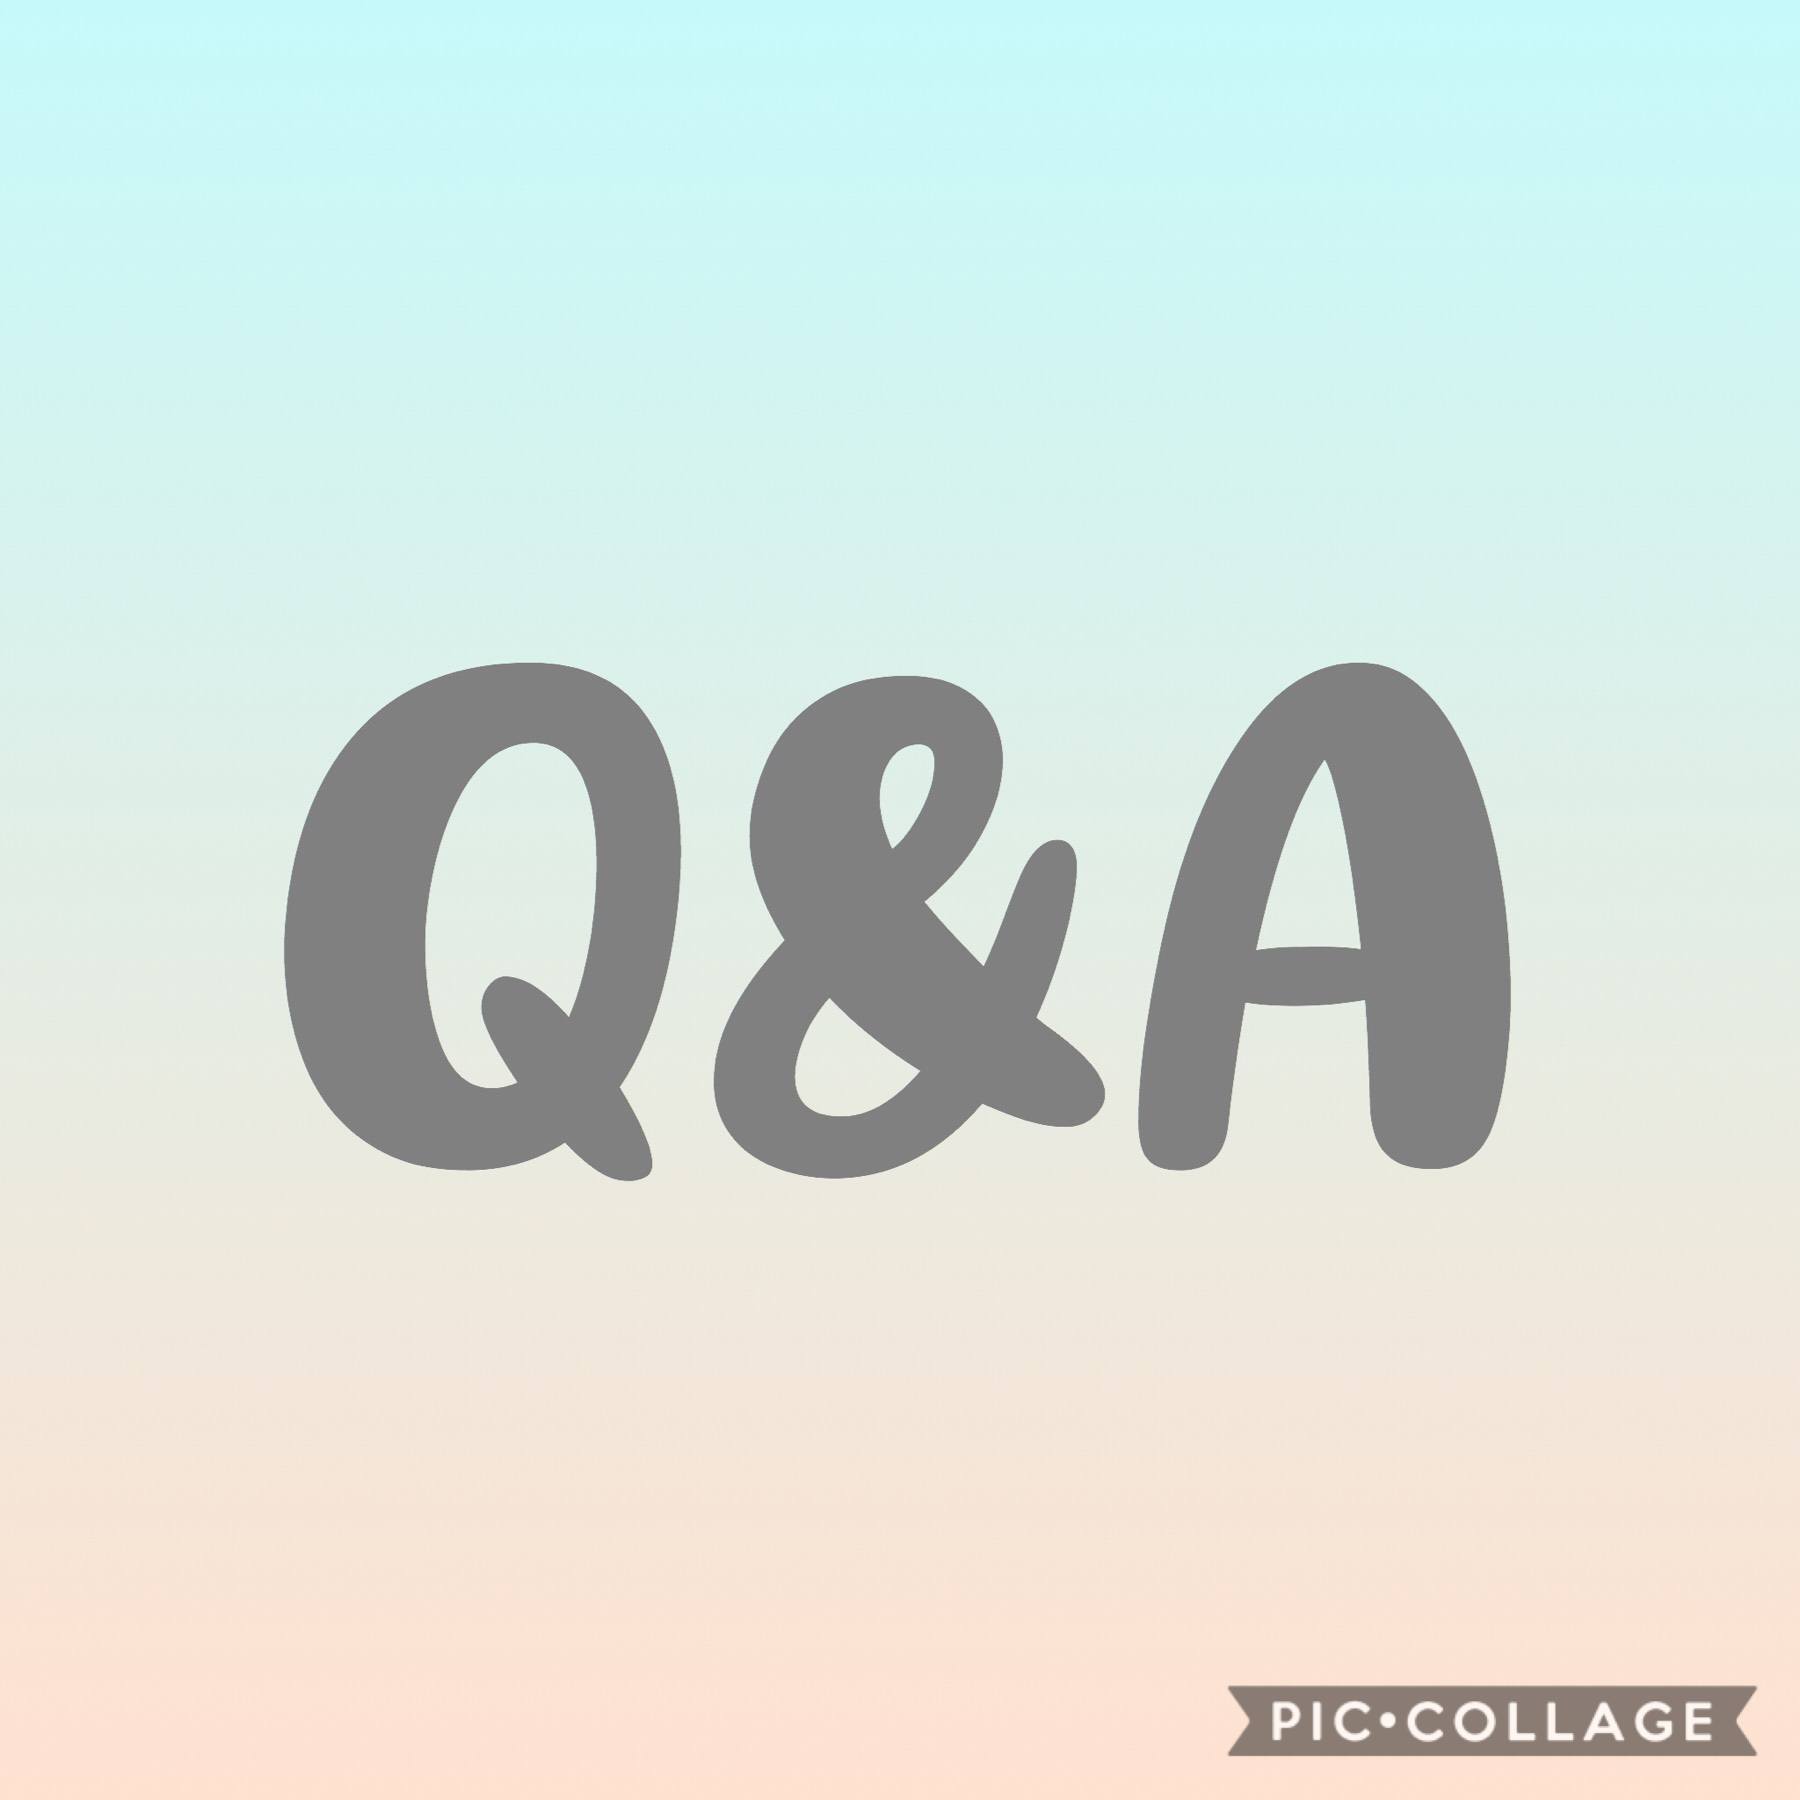 Tap
Comment questions (nothing too personal) 
I’ll do answers 12th August 

5/8/18